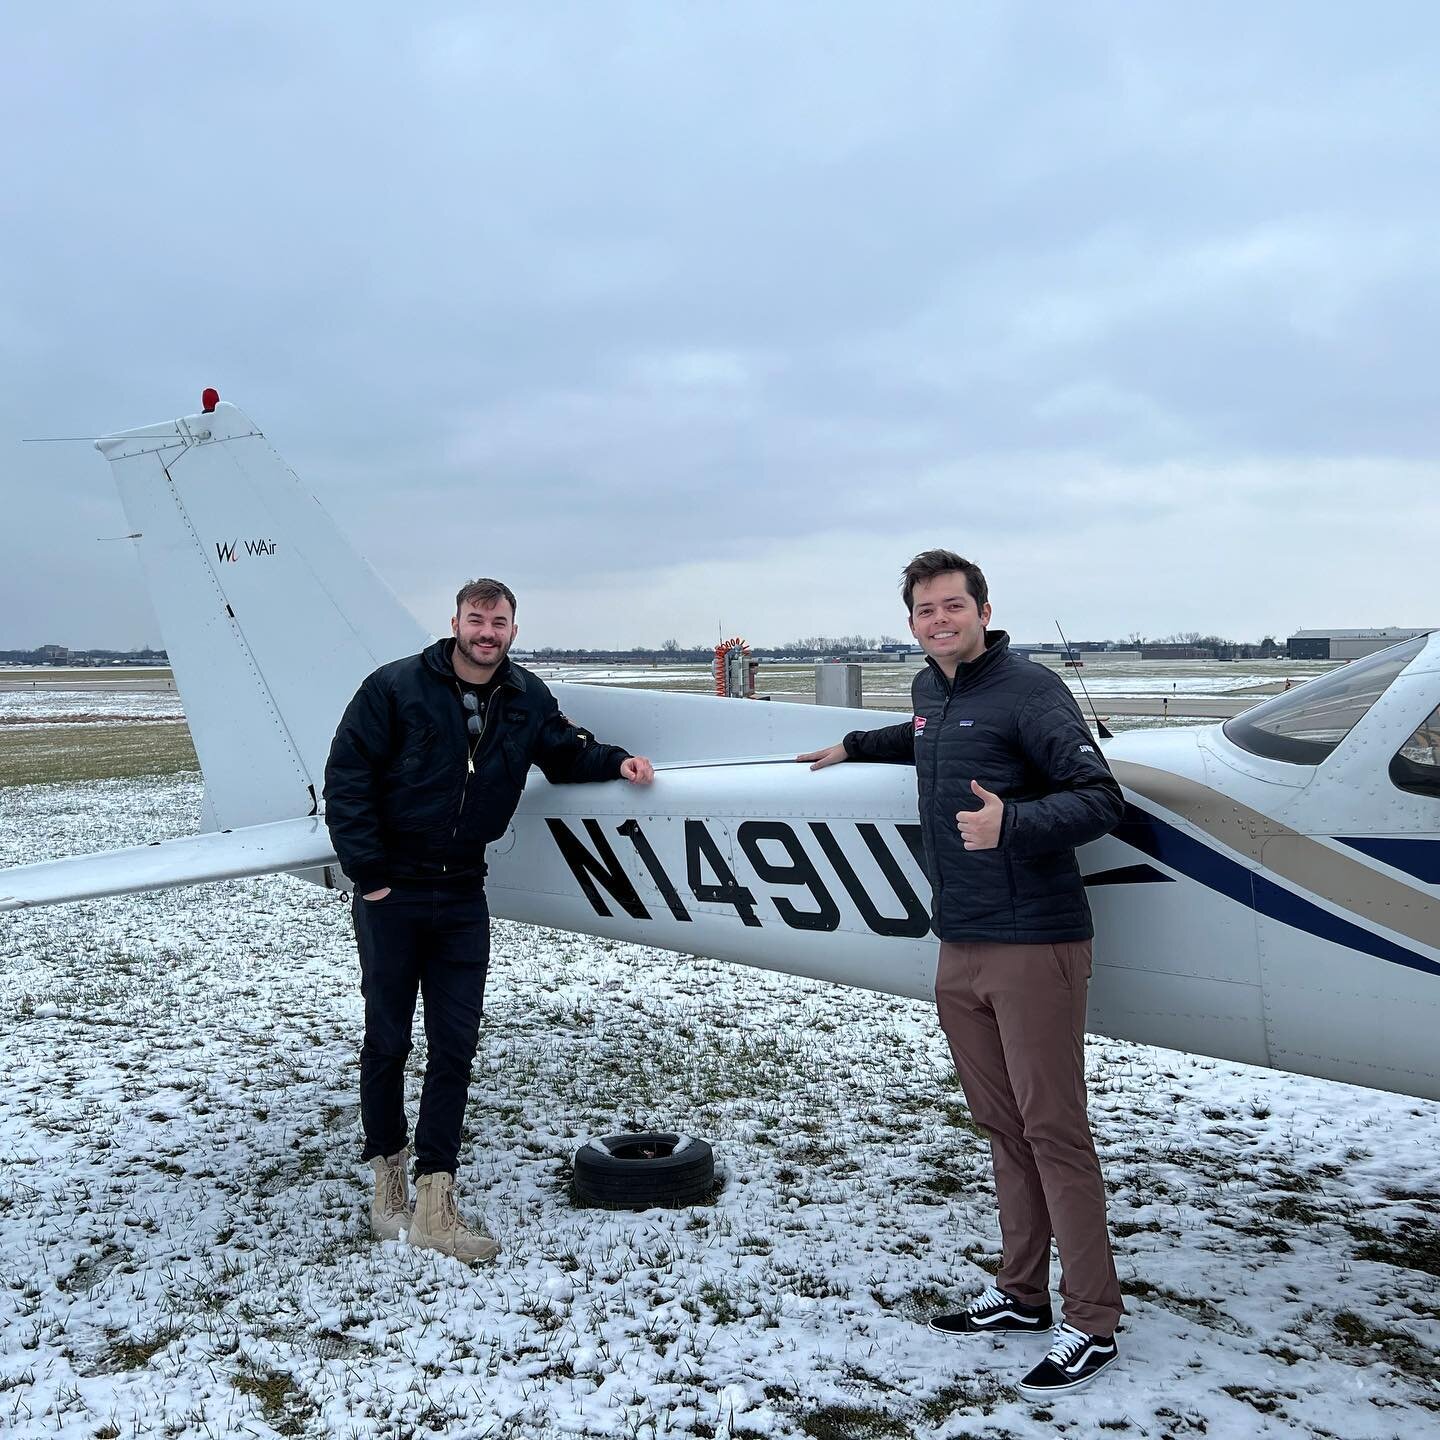 Congratulations to Austin for passing his private pilot check ride this week! 
.
.
.
#pilot #aviation #flighttraining #flightschool